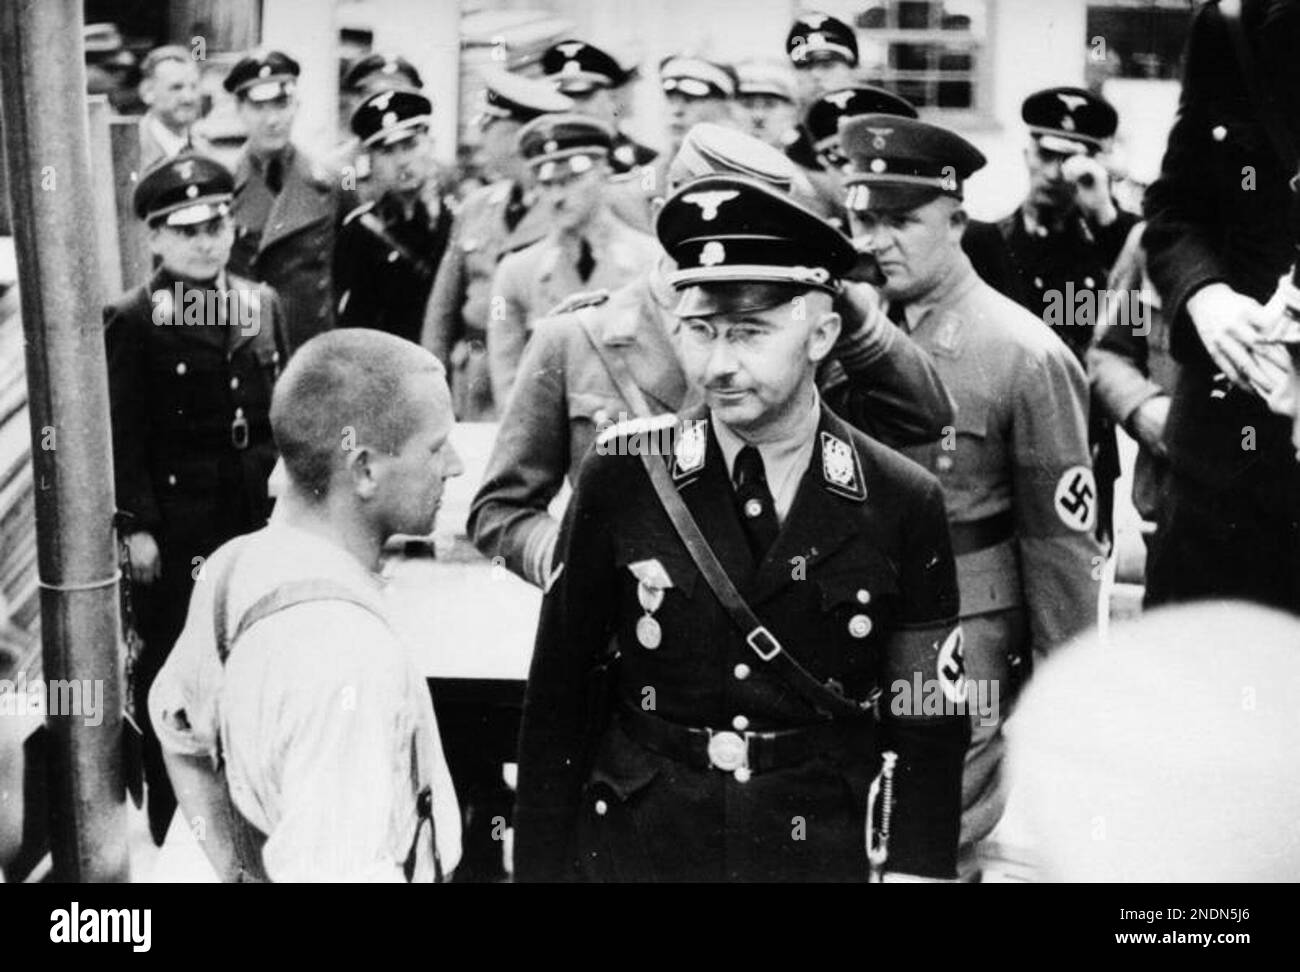 Heinrich Himmler inspecting Dachau concentration camp on 8 May 1936. Photo Bundesarchiv, Bild 152-11-12 / CC-BY-SA 3.0, CC BY-SA 3.0 de, https://commons.wikimedia.org/w/index.php?curid=5337638 Stock Photo